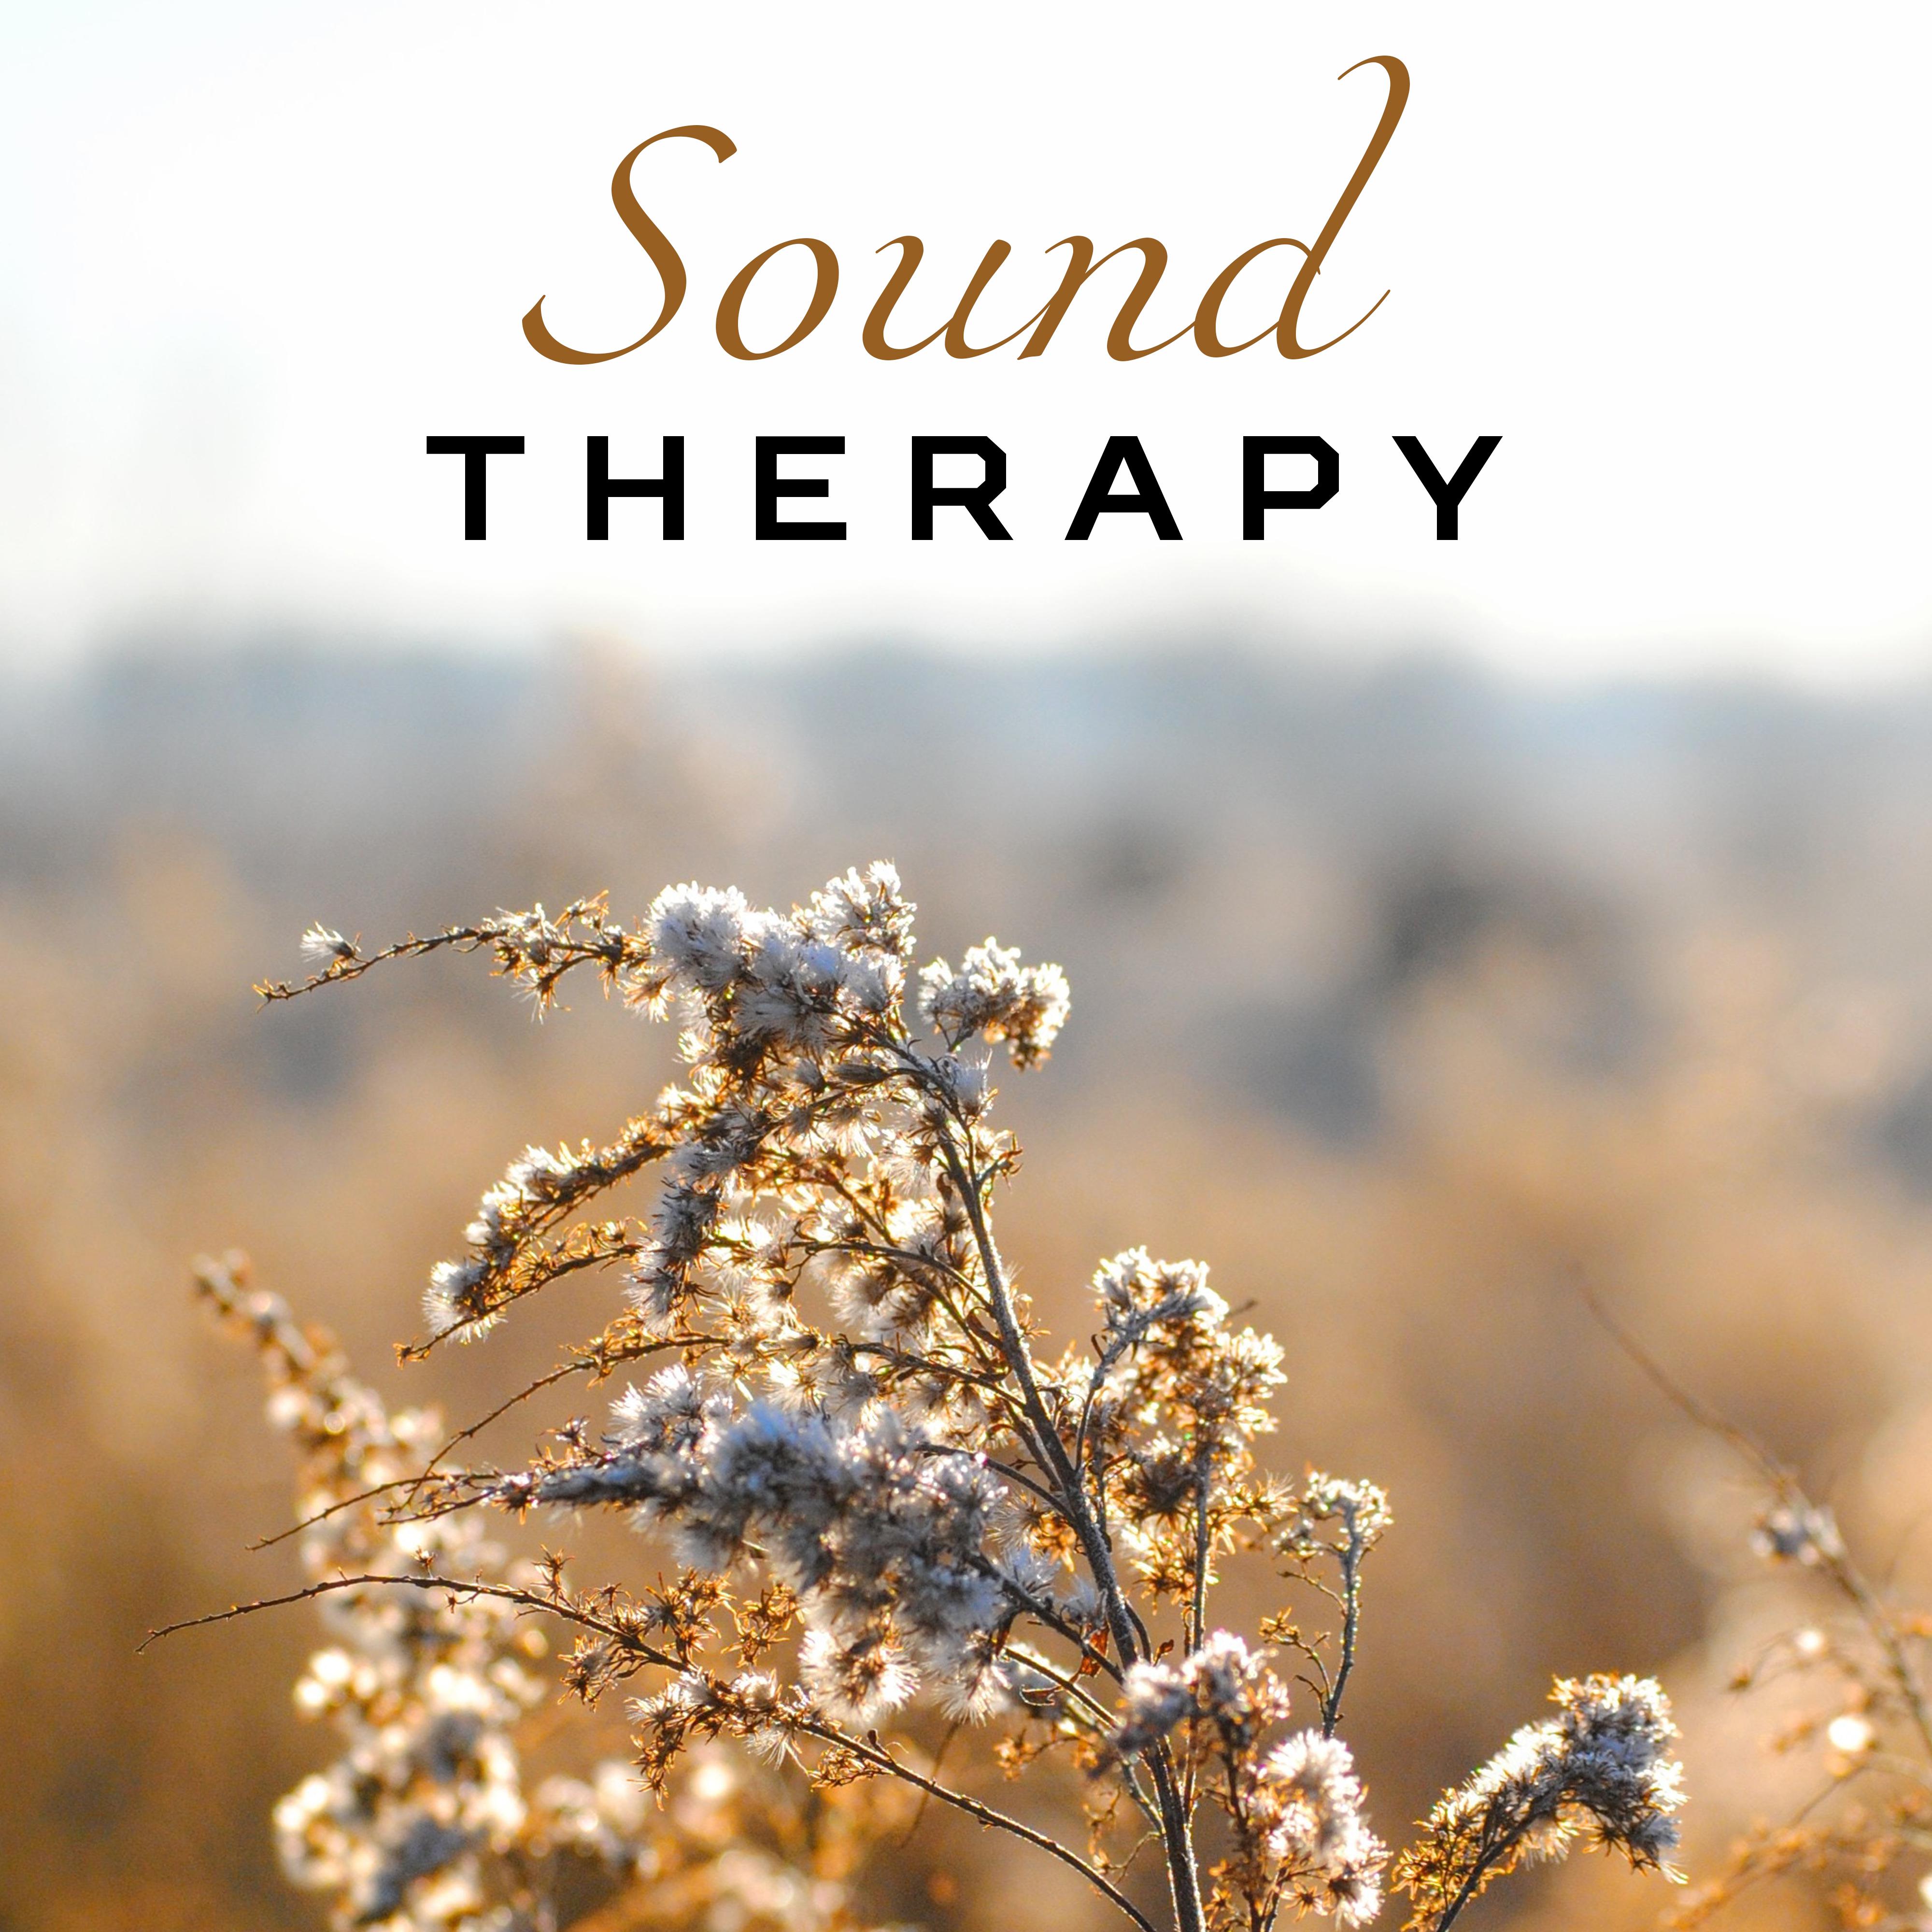 Sound Therapy – Soothing Music, Water Reduces Stress, Peaceful Mind, Meditate, Nature Sounds